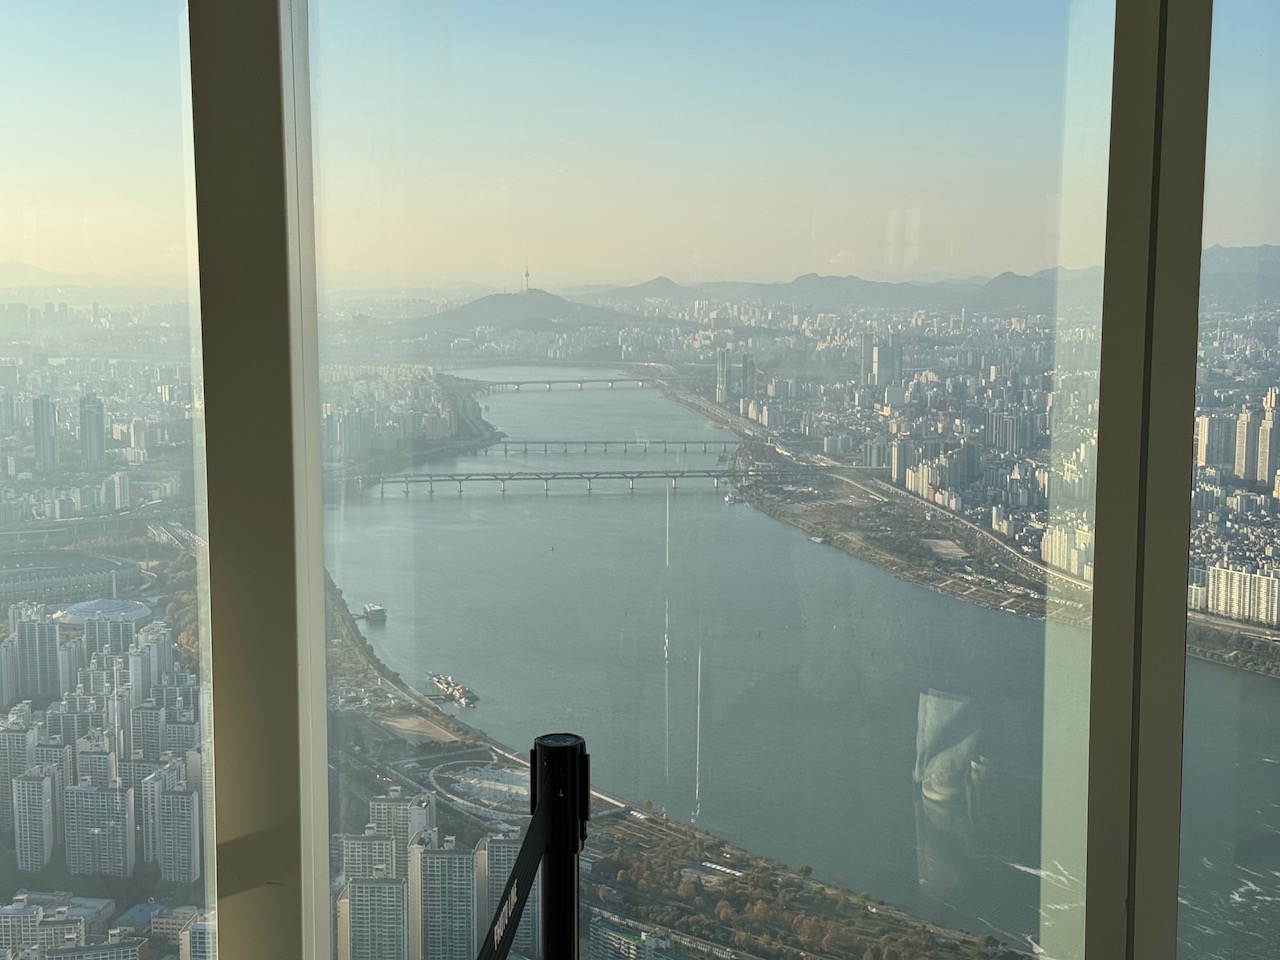 The Han river as seen from the Lotte tower in Seoul